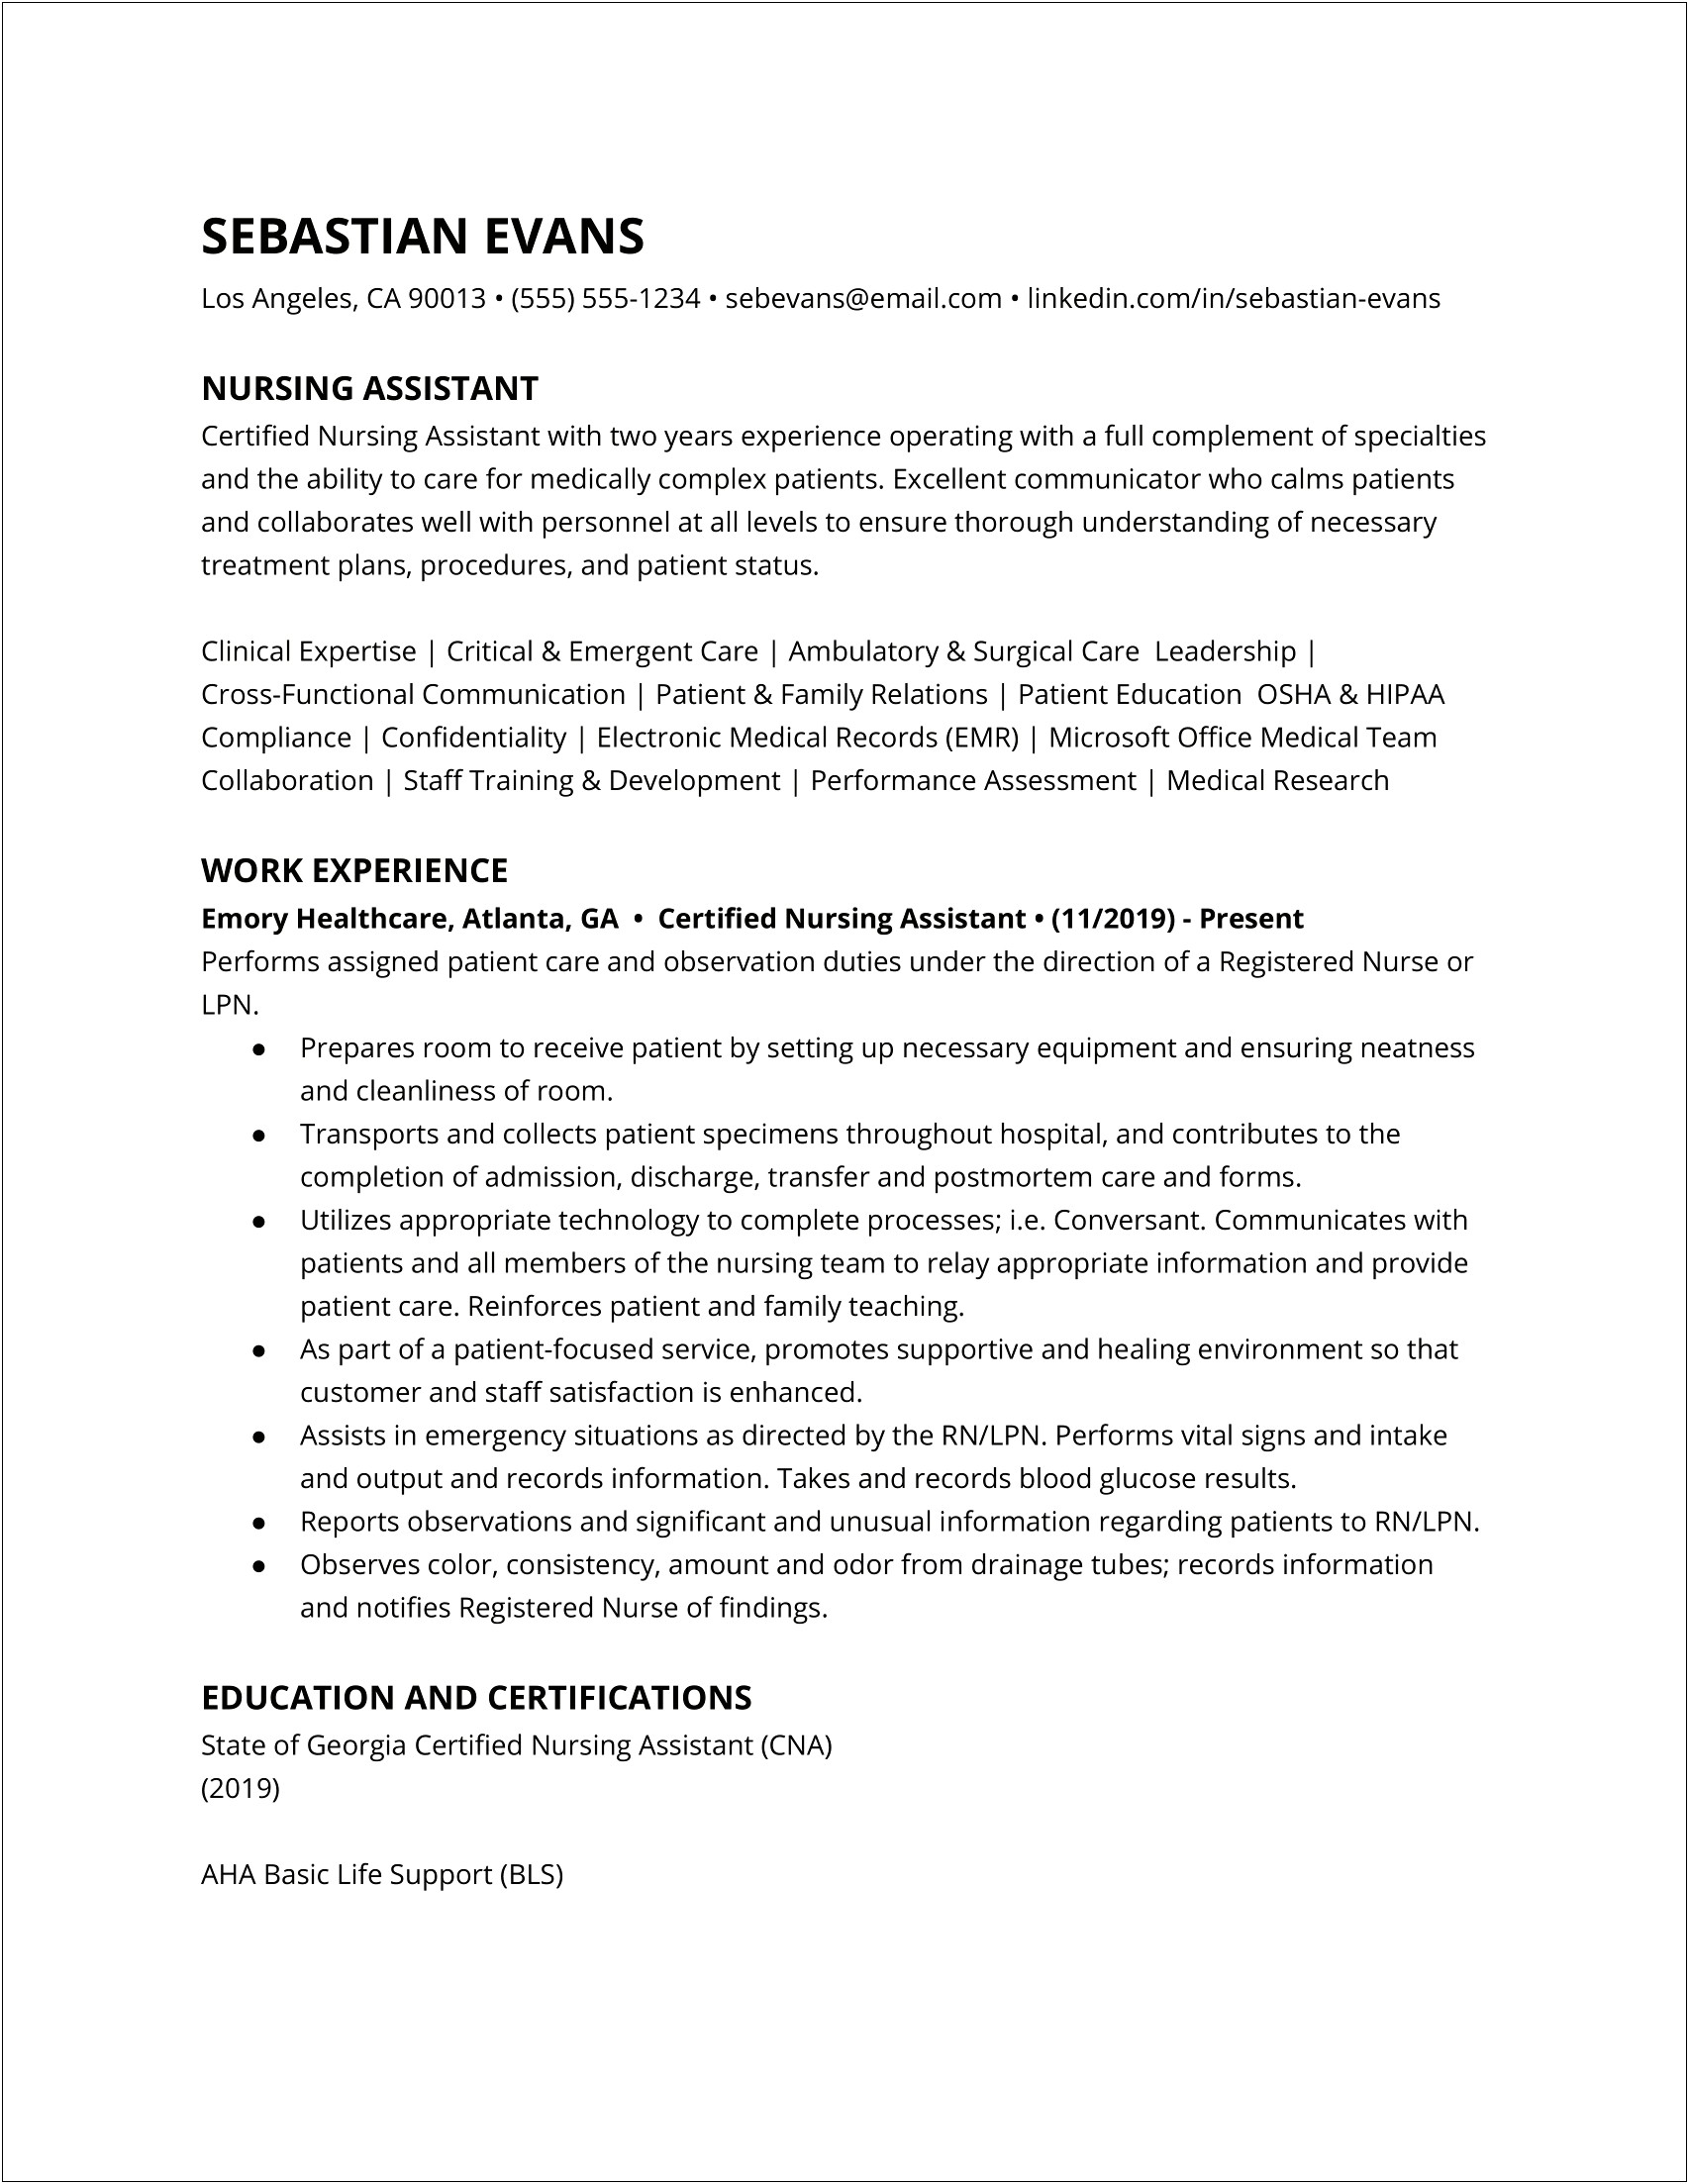 Example Of A Nursing Assistant Resume